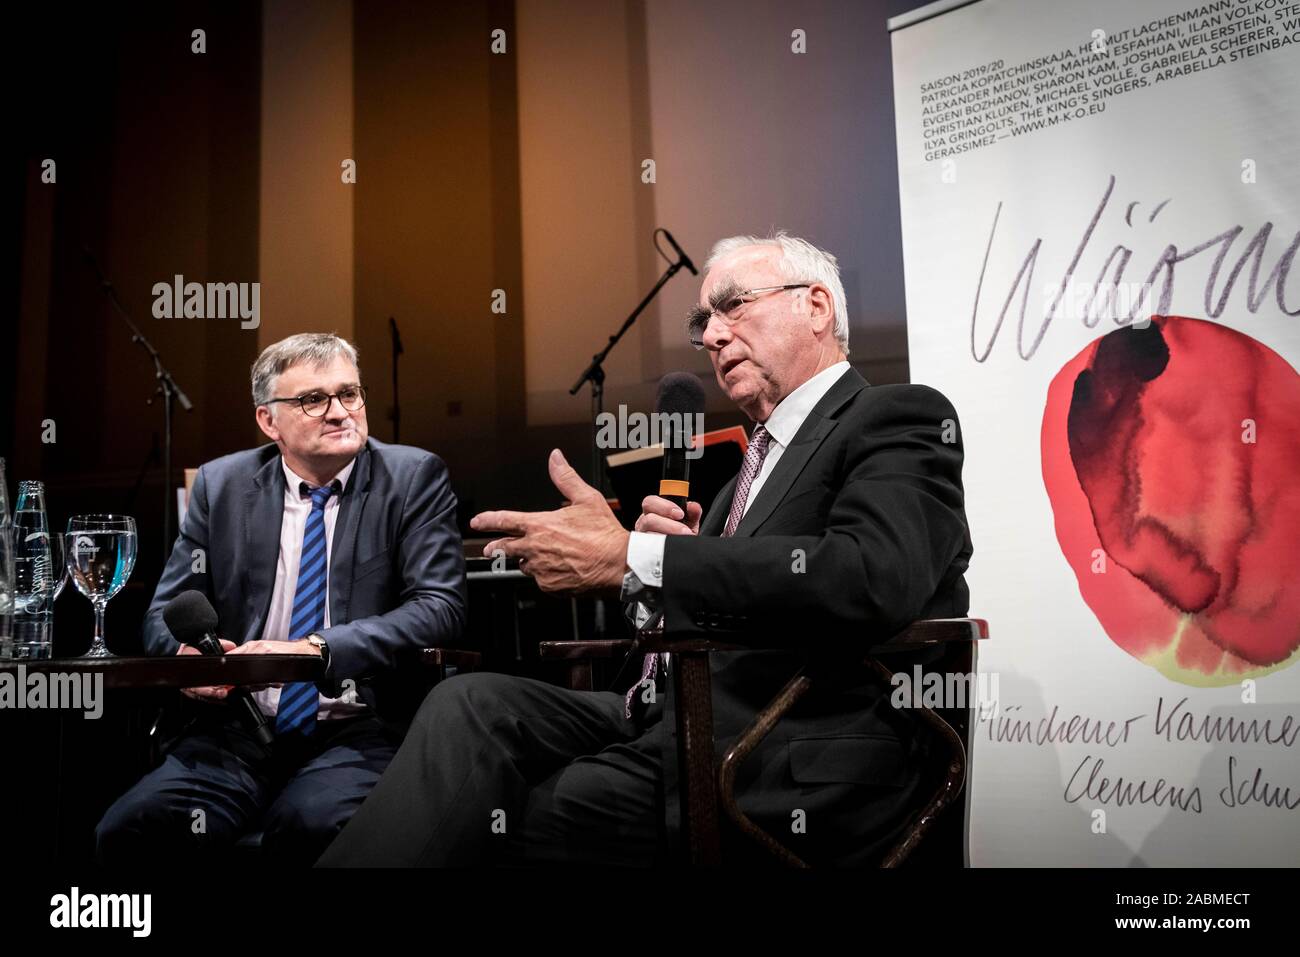 At the beginning of the series 'Wärme und Wallung' of the 'Süddeutsche Zeitung' and the Munich Chamber Orchestra, Clemens Schuldt, Stefan Kornelius and Theo Waigel discuss Germany 30 years after reunification in the Munich Prinzregententheater: SZ journalist Stefan Kornelius (left) and Theo Waigel of the CSU (right). [automated translation] Stock Photo